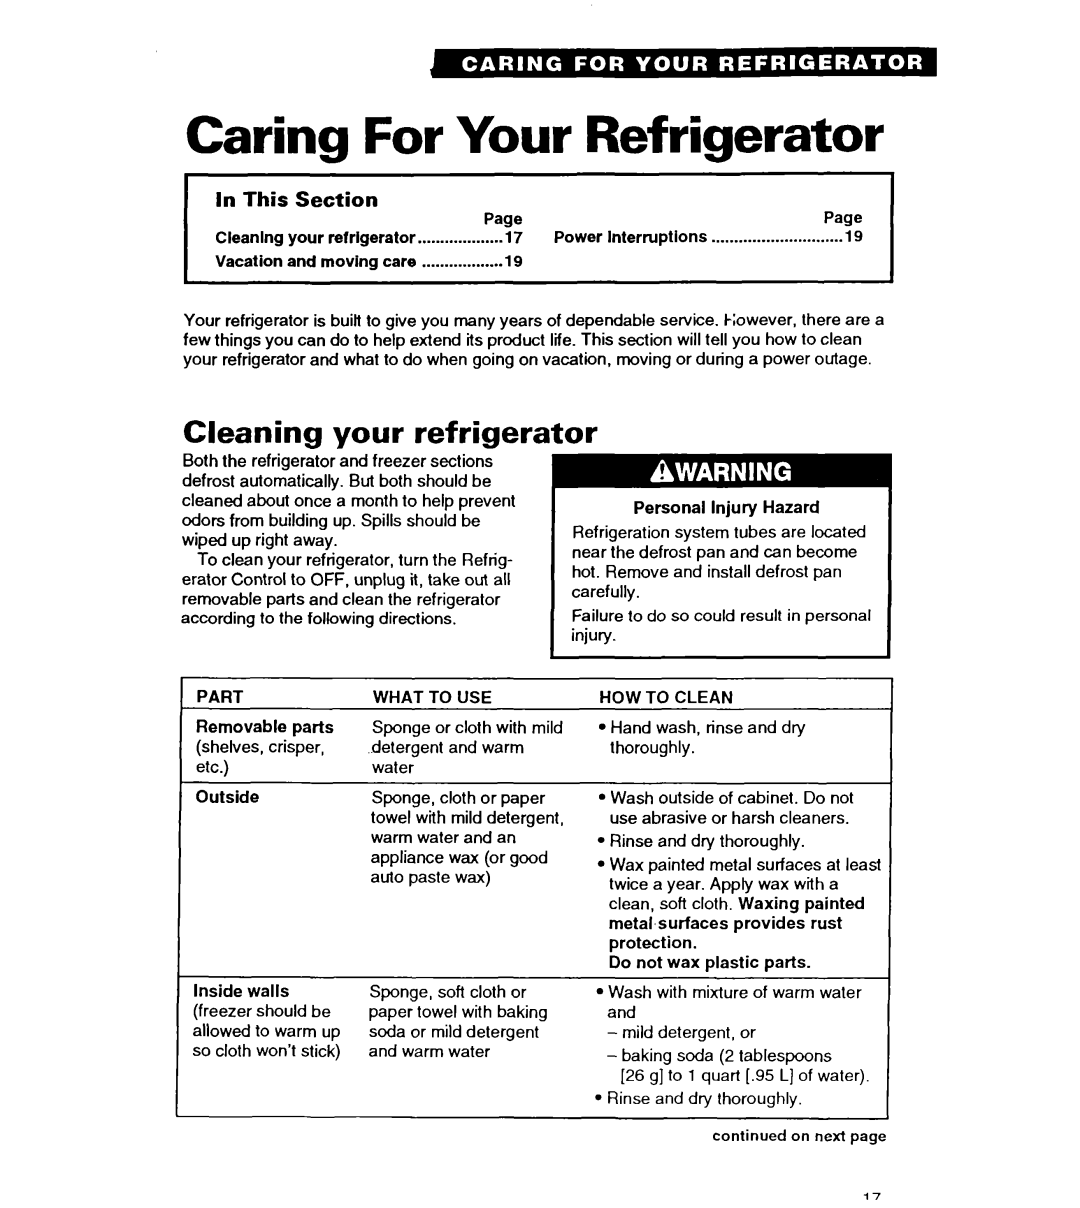 Whirlpool ET22DQ warranty Caring For Your Refrigerator, Cleaning your refrigerator, In This, Section 